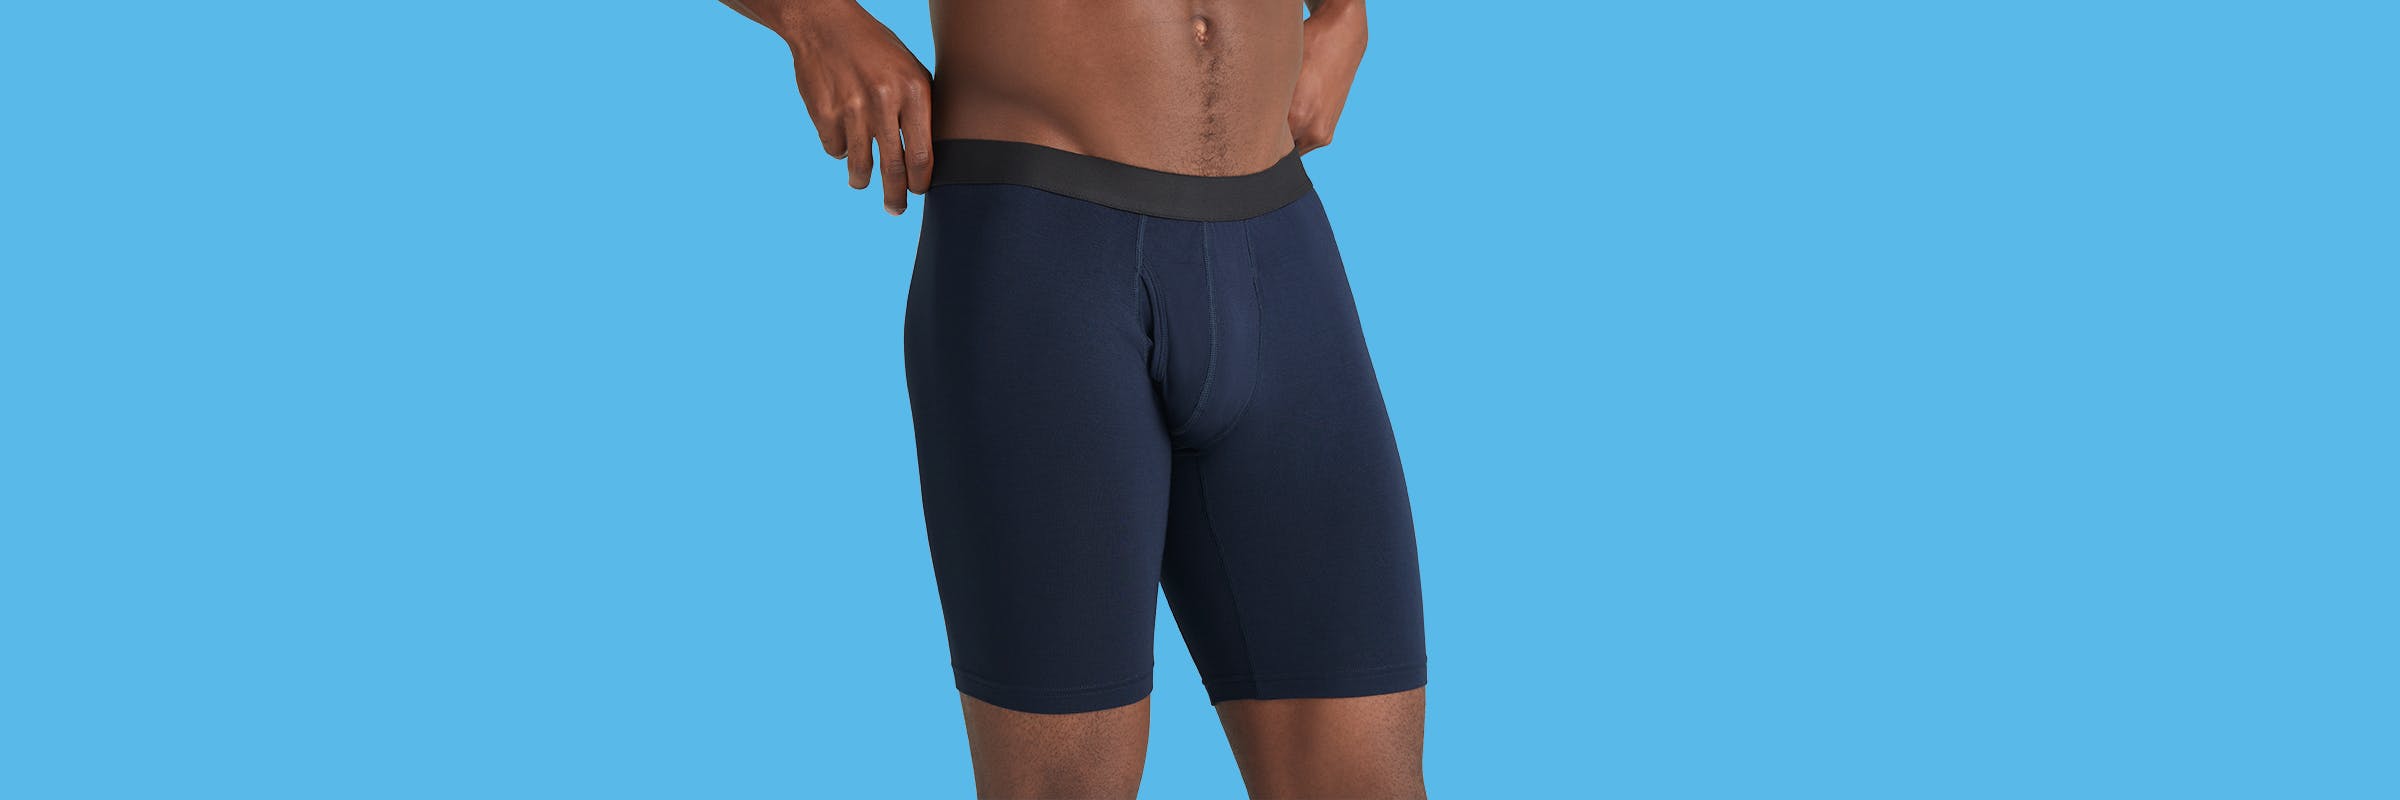 Long Boxer Brief w/ Fly